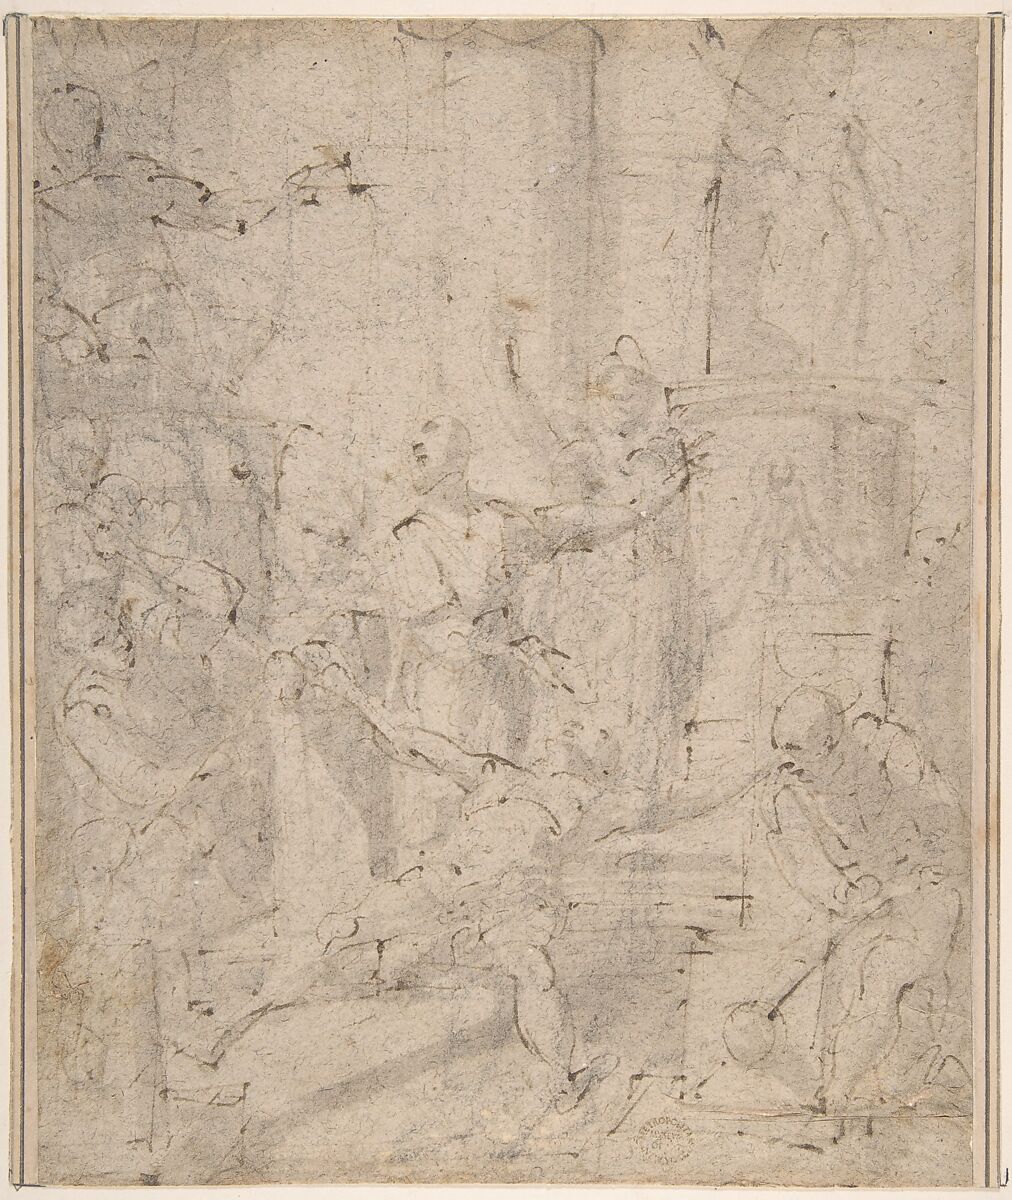 Martyrdom of Saint Andrew, Anonymous, Italian, Roman-Bolognese, 17th century, Pen and brown ink, brush and brown/gray wash, over traces of charcoal, on light brown paper 